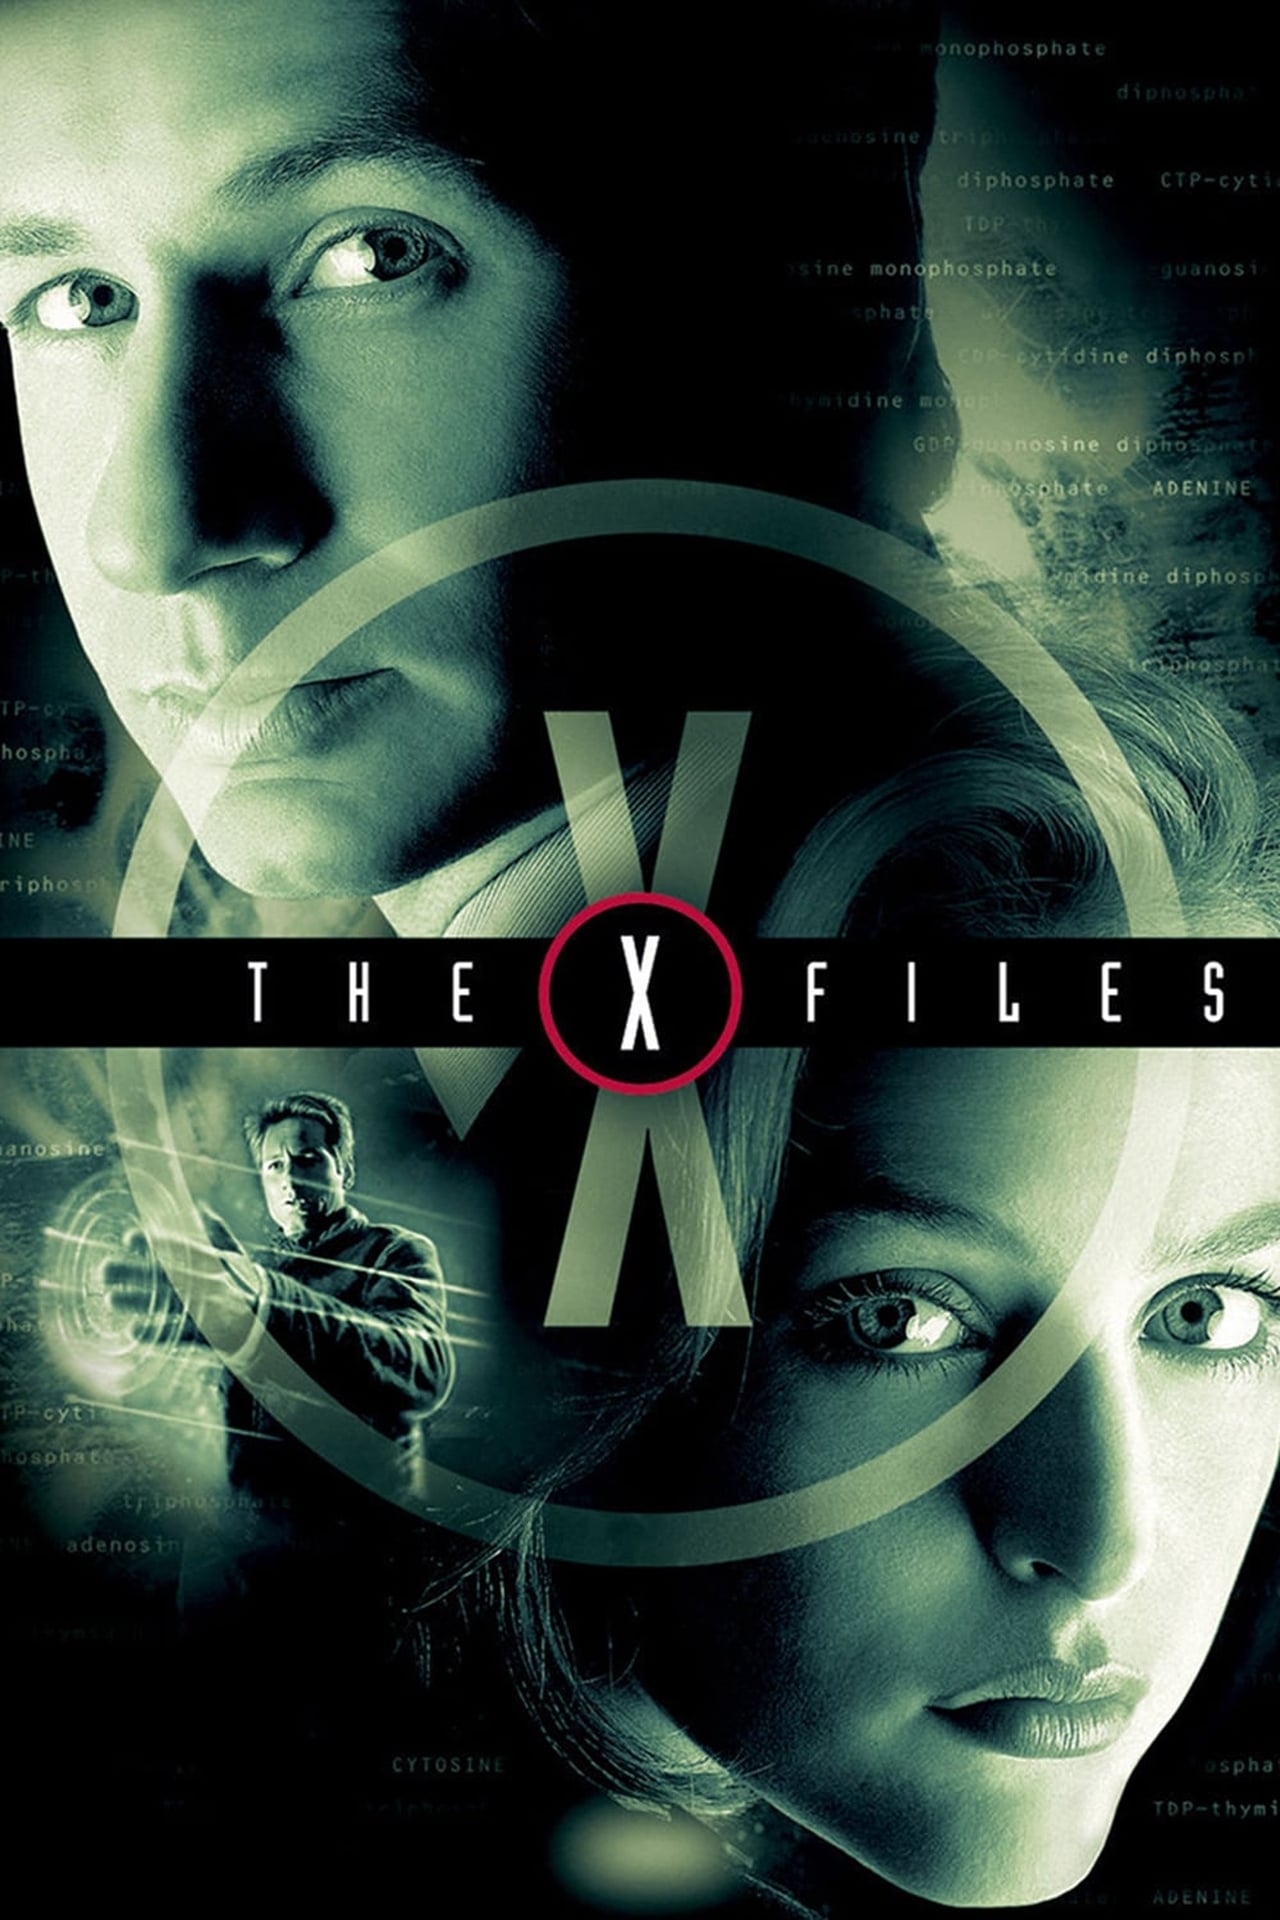 The X Files - Fight the Future: Blooper Reel (1998) Extended Cut 192Kbps 23.976Fps 48Khz 2.0Ch DigitalTV Turkish Audio TAC